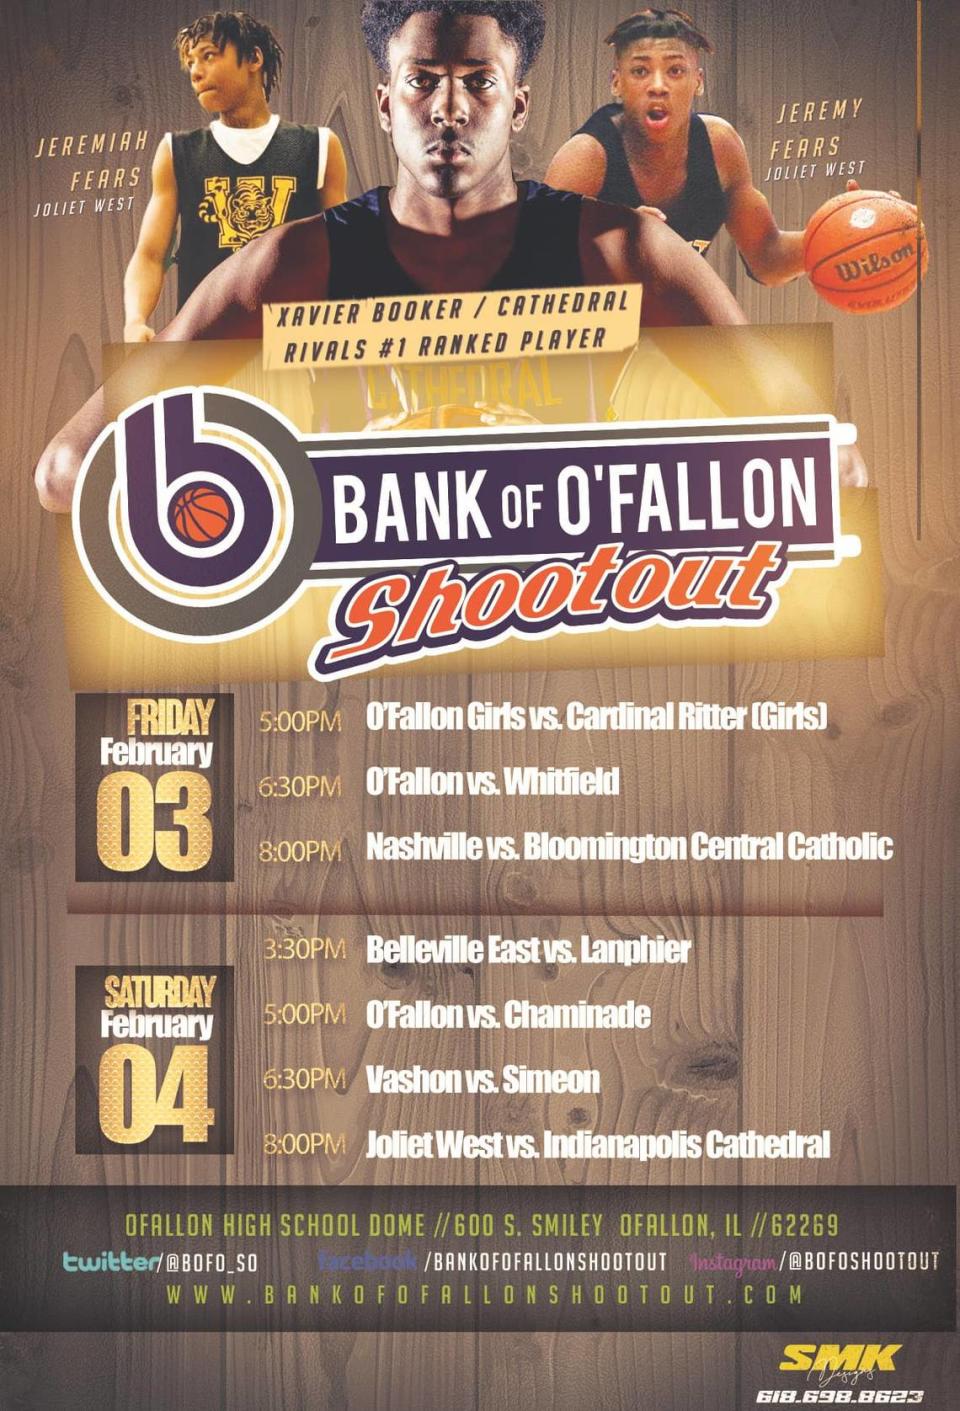 The Bank of O’Fallon Shootout will take place Friday-Saturday at O’Fallon Township High School. The two-day event will feature seven games.